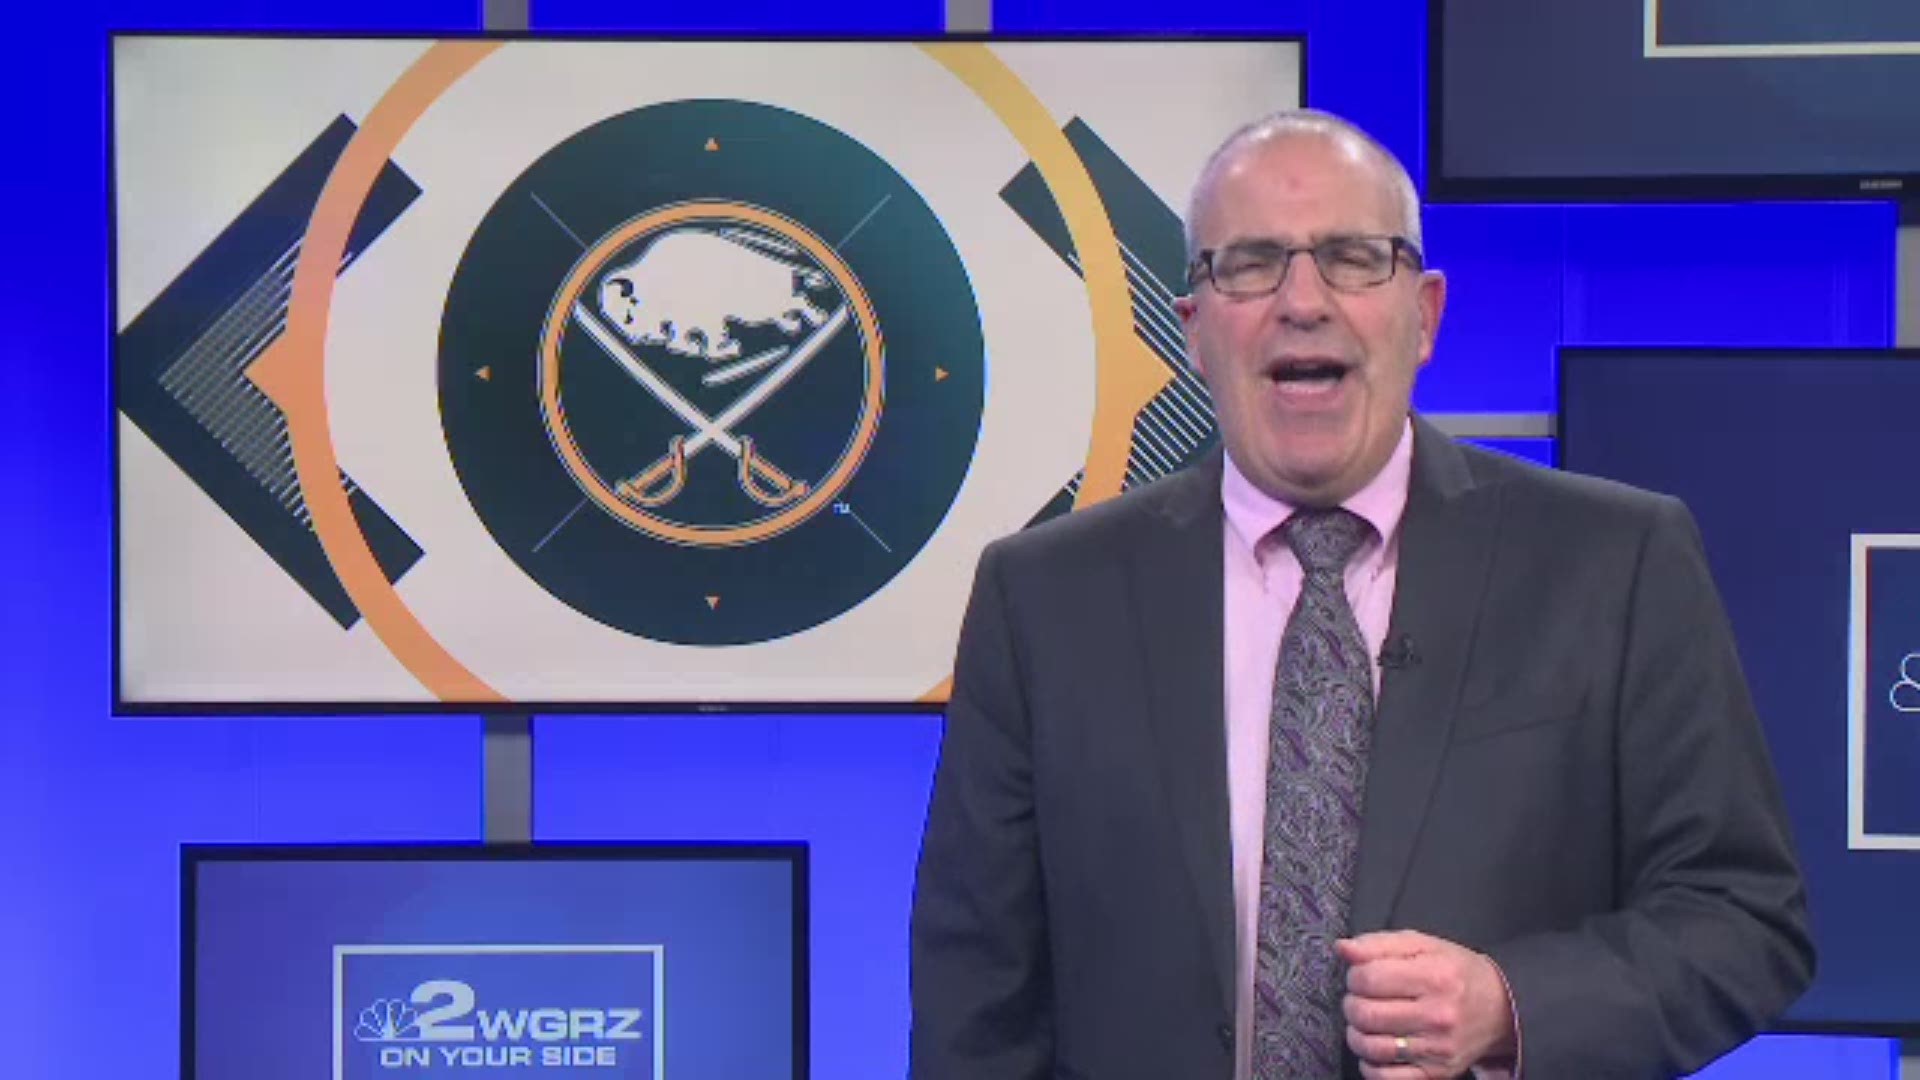 Stu Boyar shares some thoughts on Jack Eichel's play and the Sabres win over the Blues